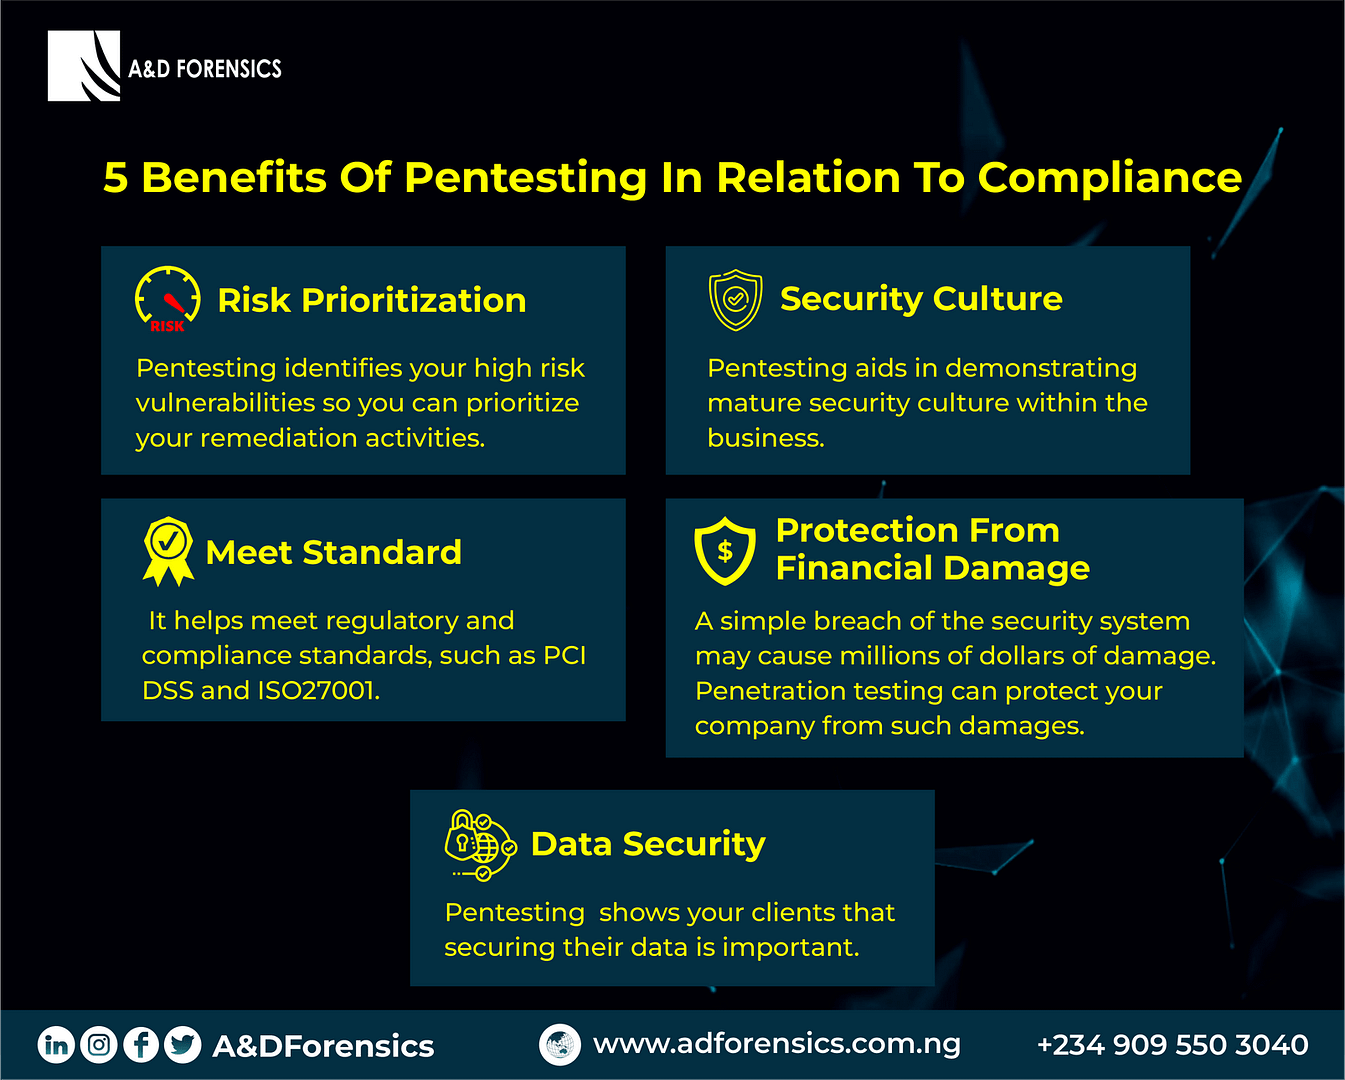 5 Benefits of Pentesting in Relation to Compliance